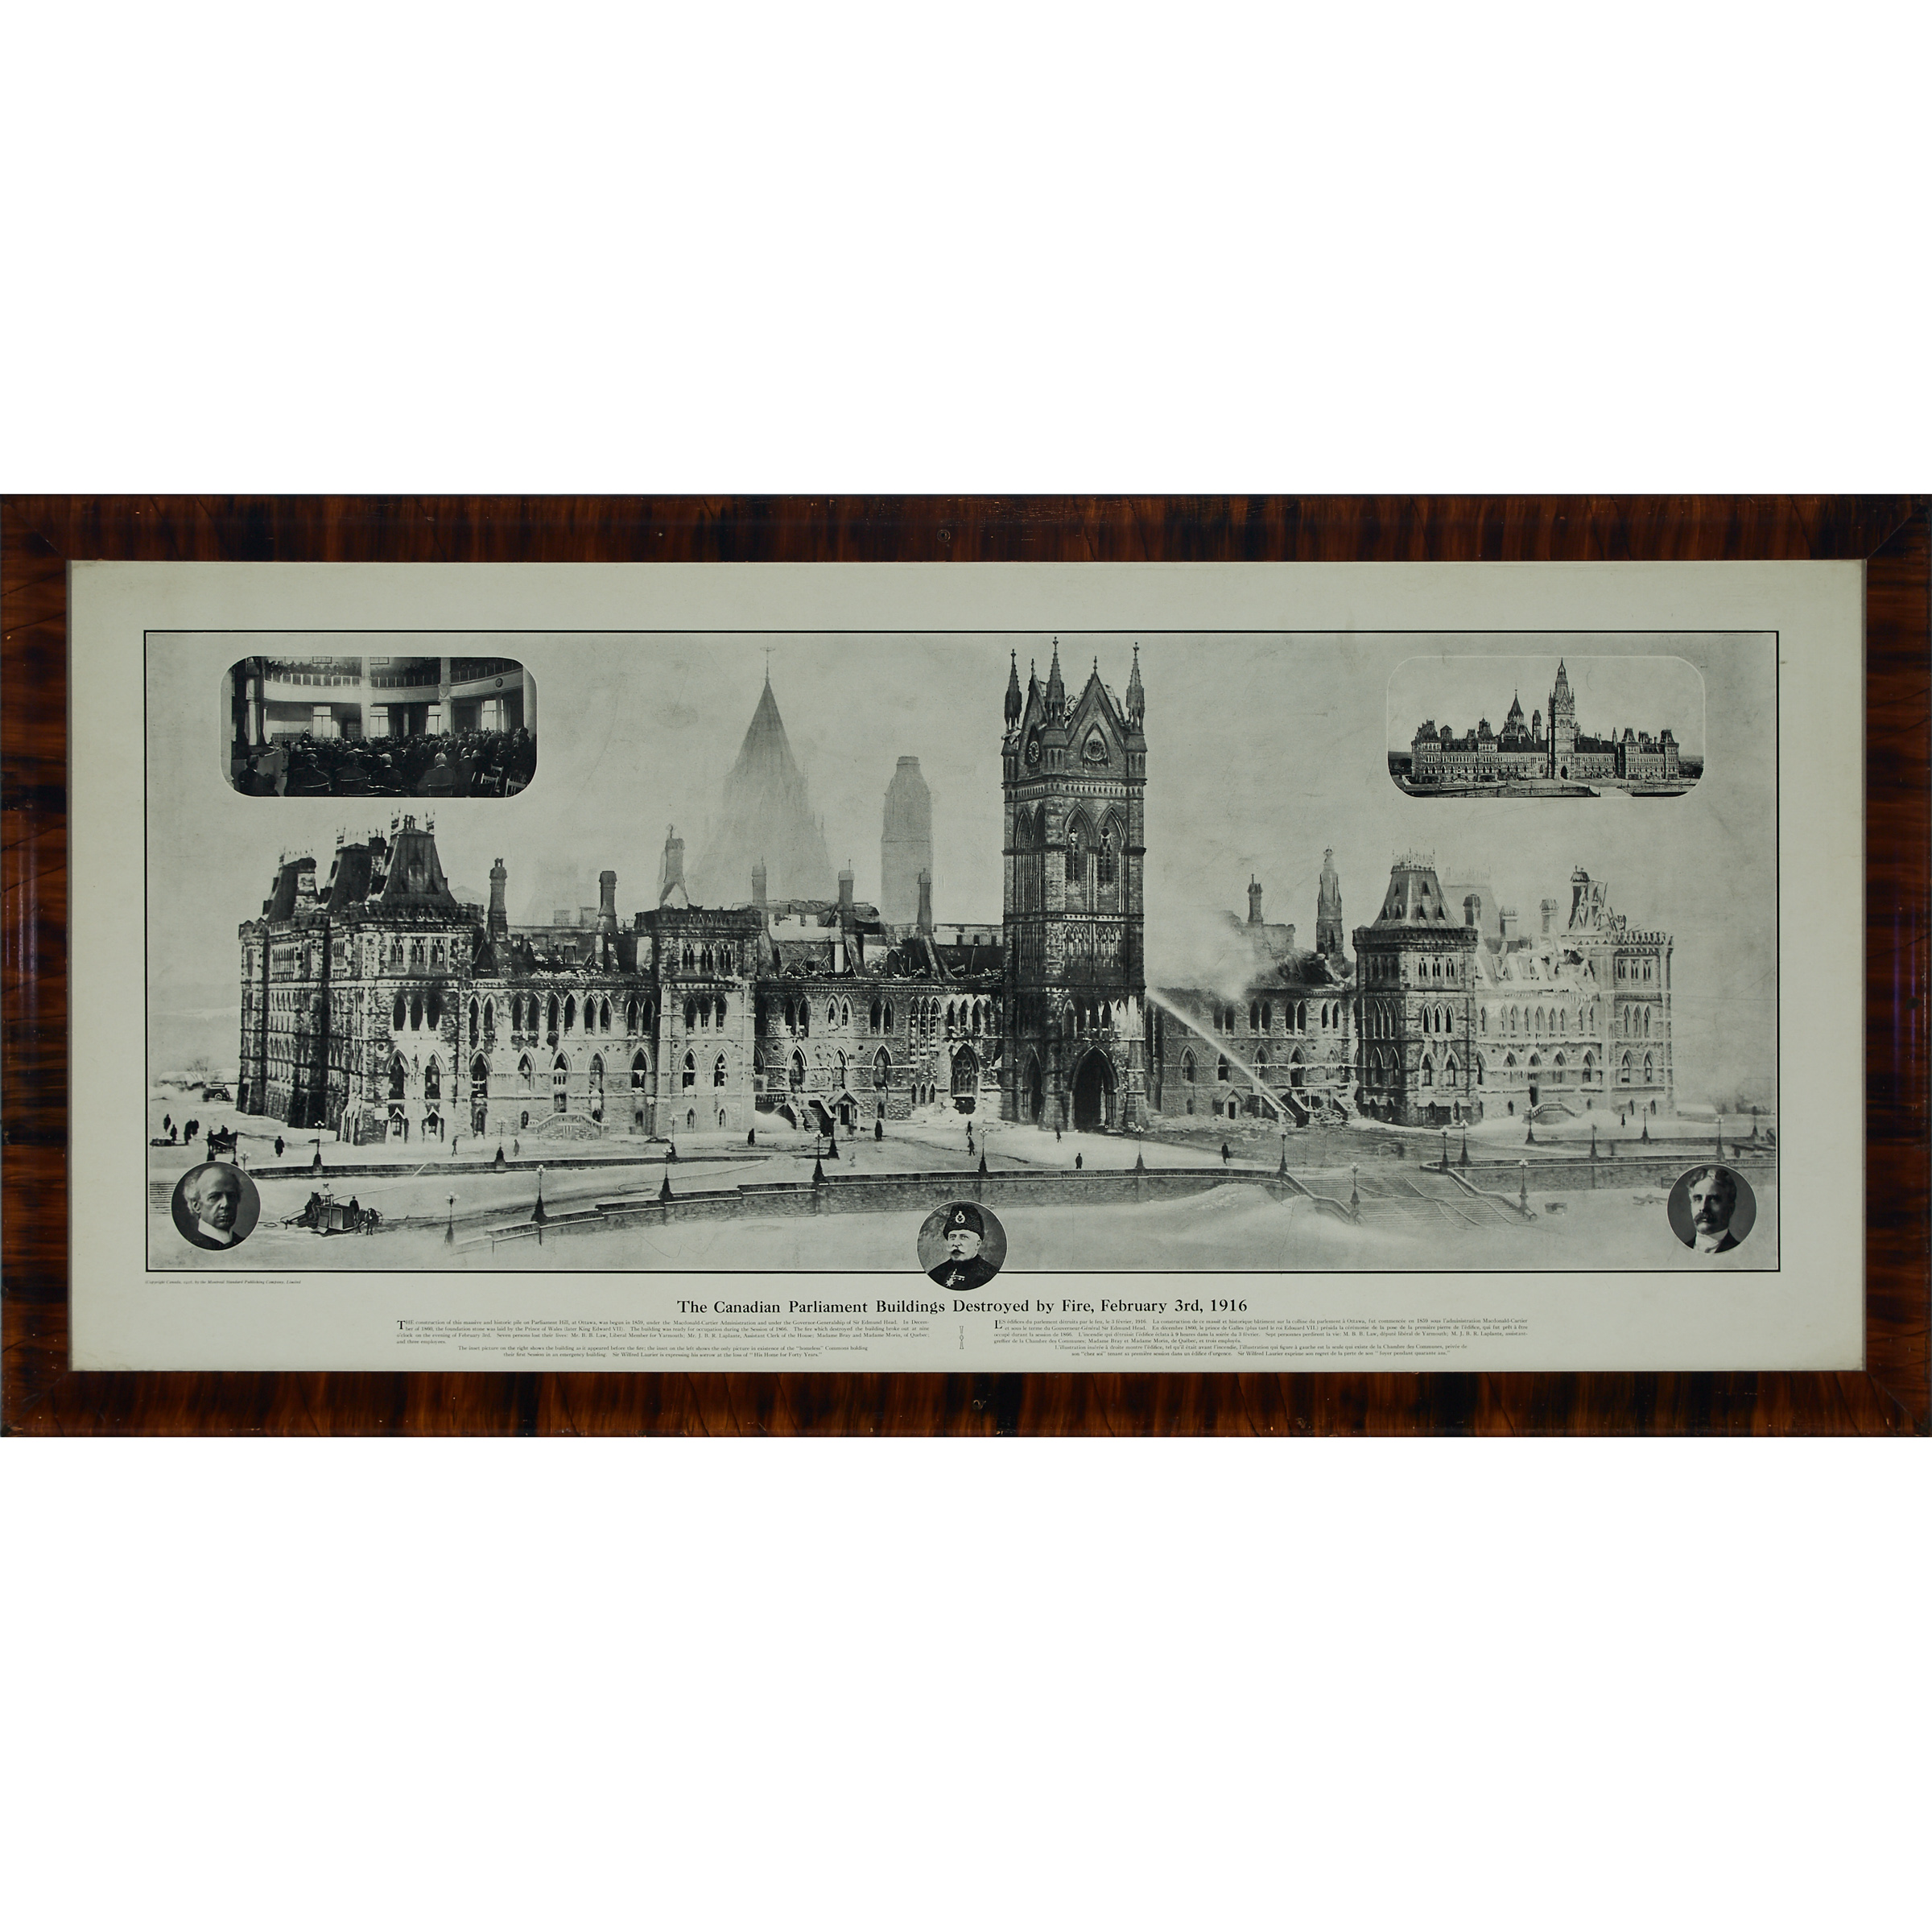 The Canadian Parliament Buildings Destroyed by Fire, February 3rd, 1916